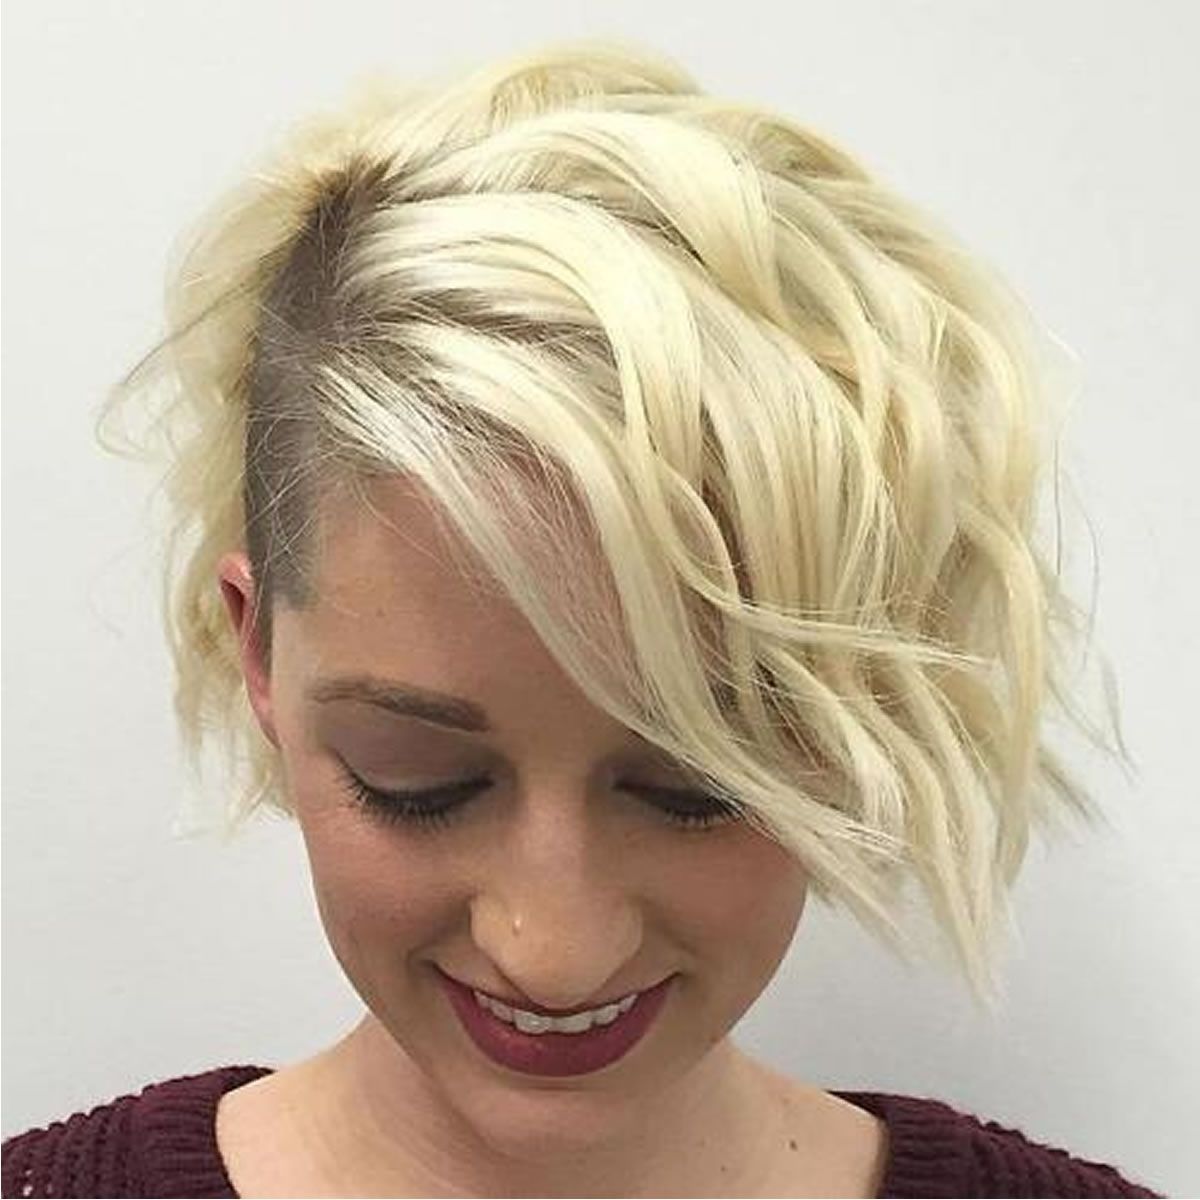 Blonde Wavy Bob Hairstyles With Temple Undercut – Hairstyles Pertaining To Current Pixie Bob Haircuts With Temple Undercut (View 13 of 15)